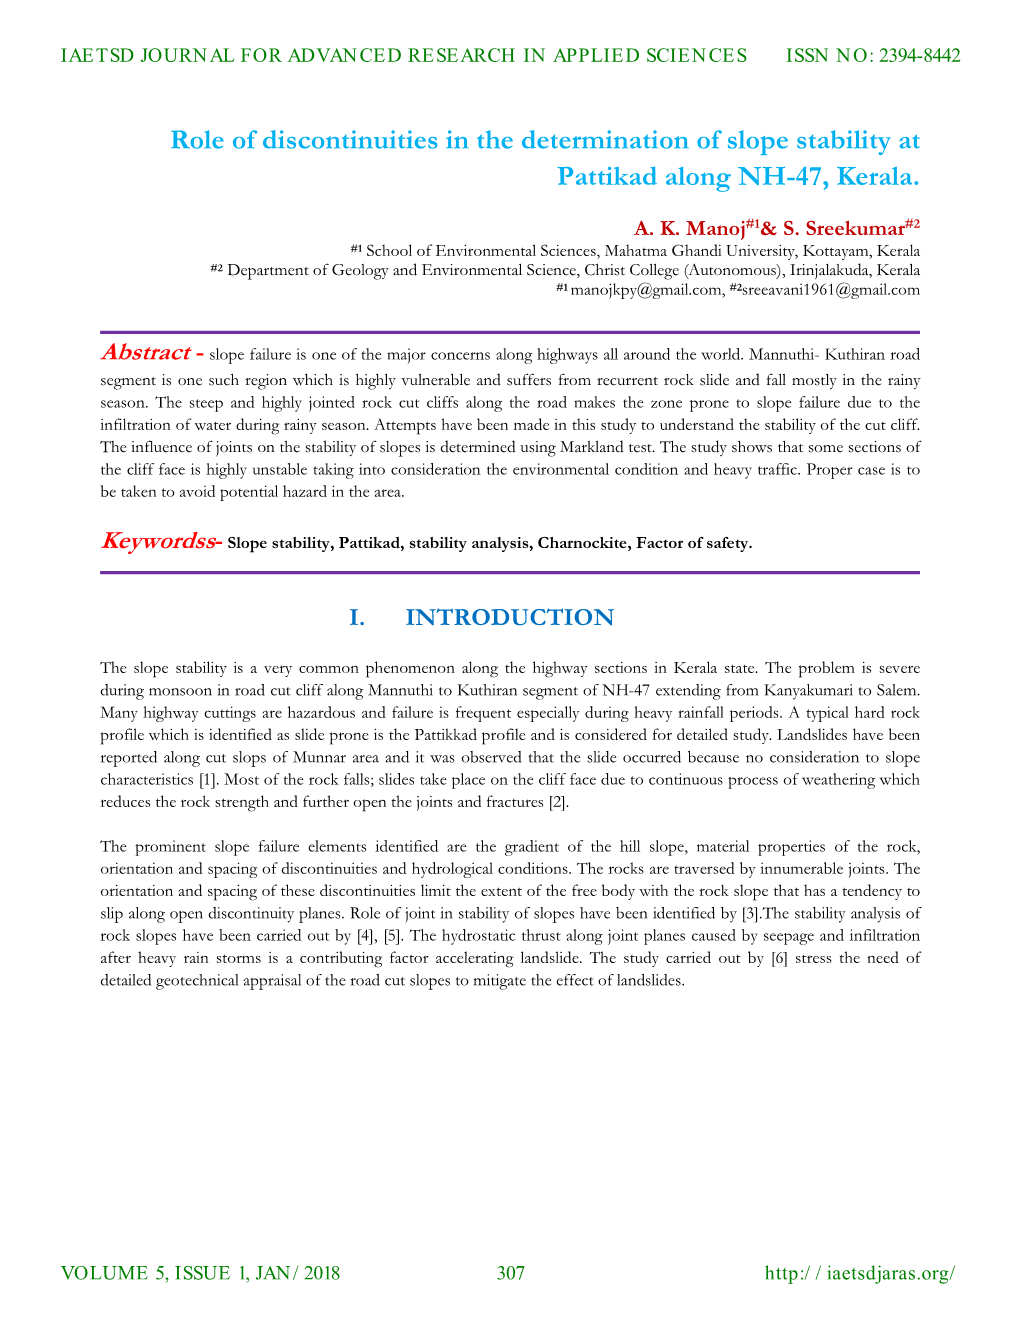 Role of Discontinuities in the Determination of Slope Stability at Pattikad Along NH-47, Kerala